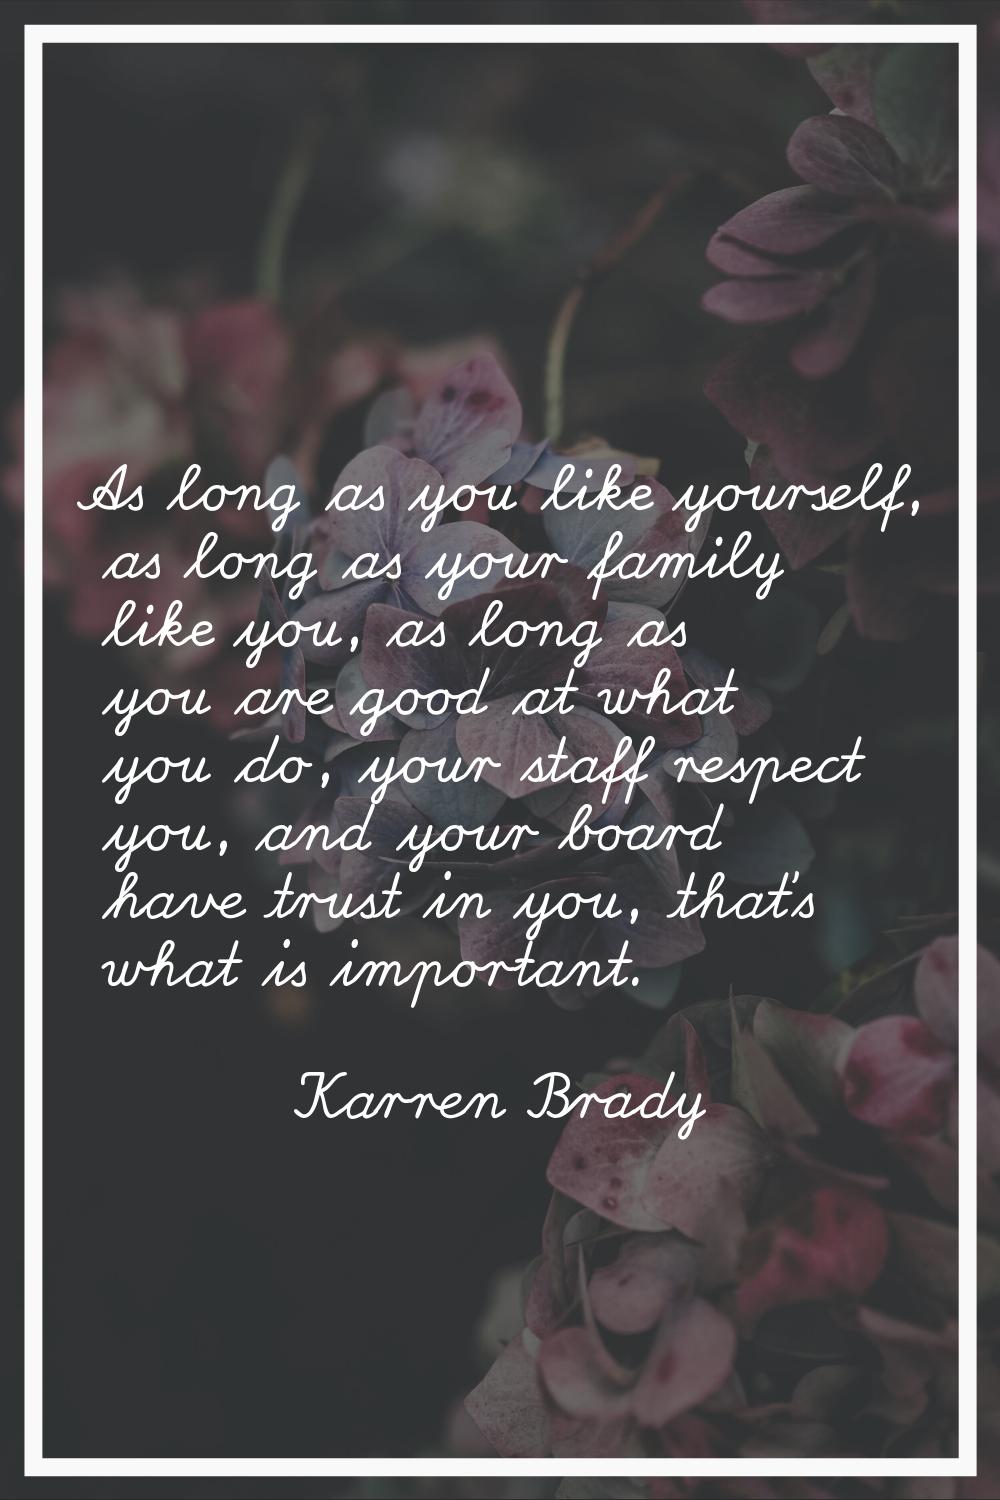 As long as you like yourself, as long as your family like you, as long as you are good at what you 